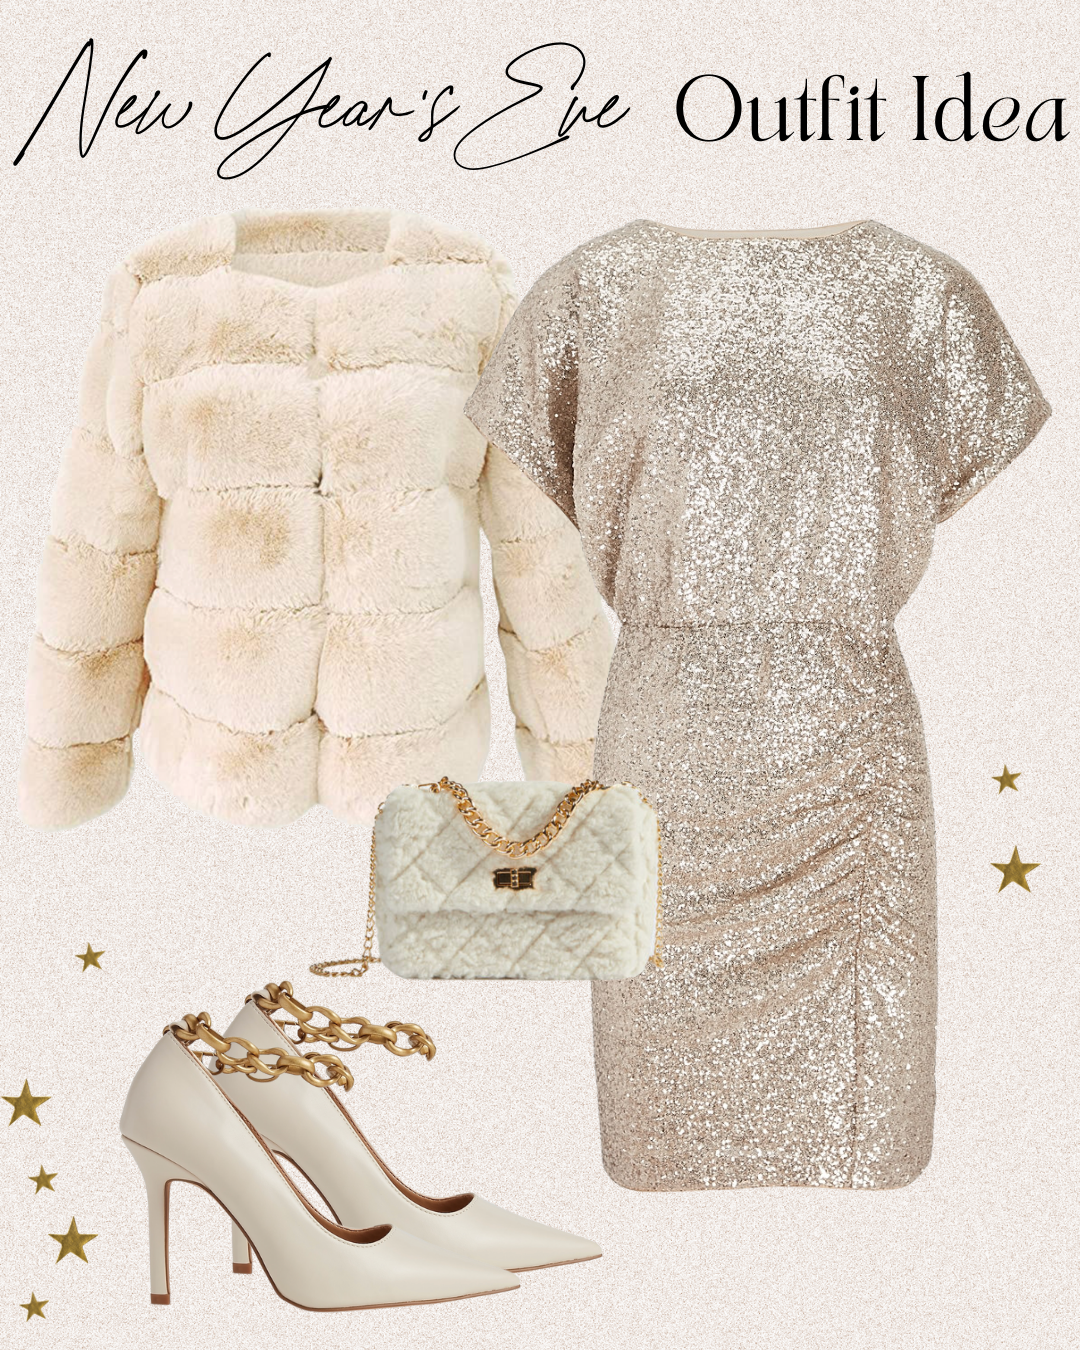 New Years Eve Outfit Ideas 2021. Sequin Mini Dress with White Faux Fur Jacket.